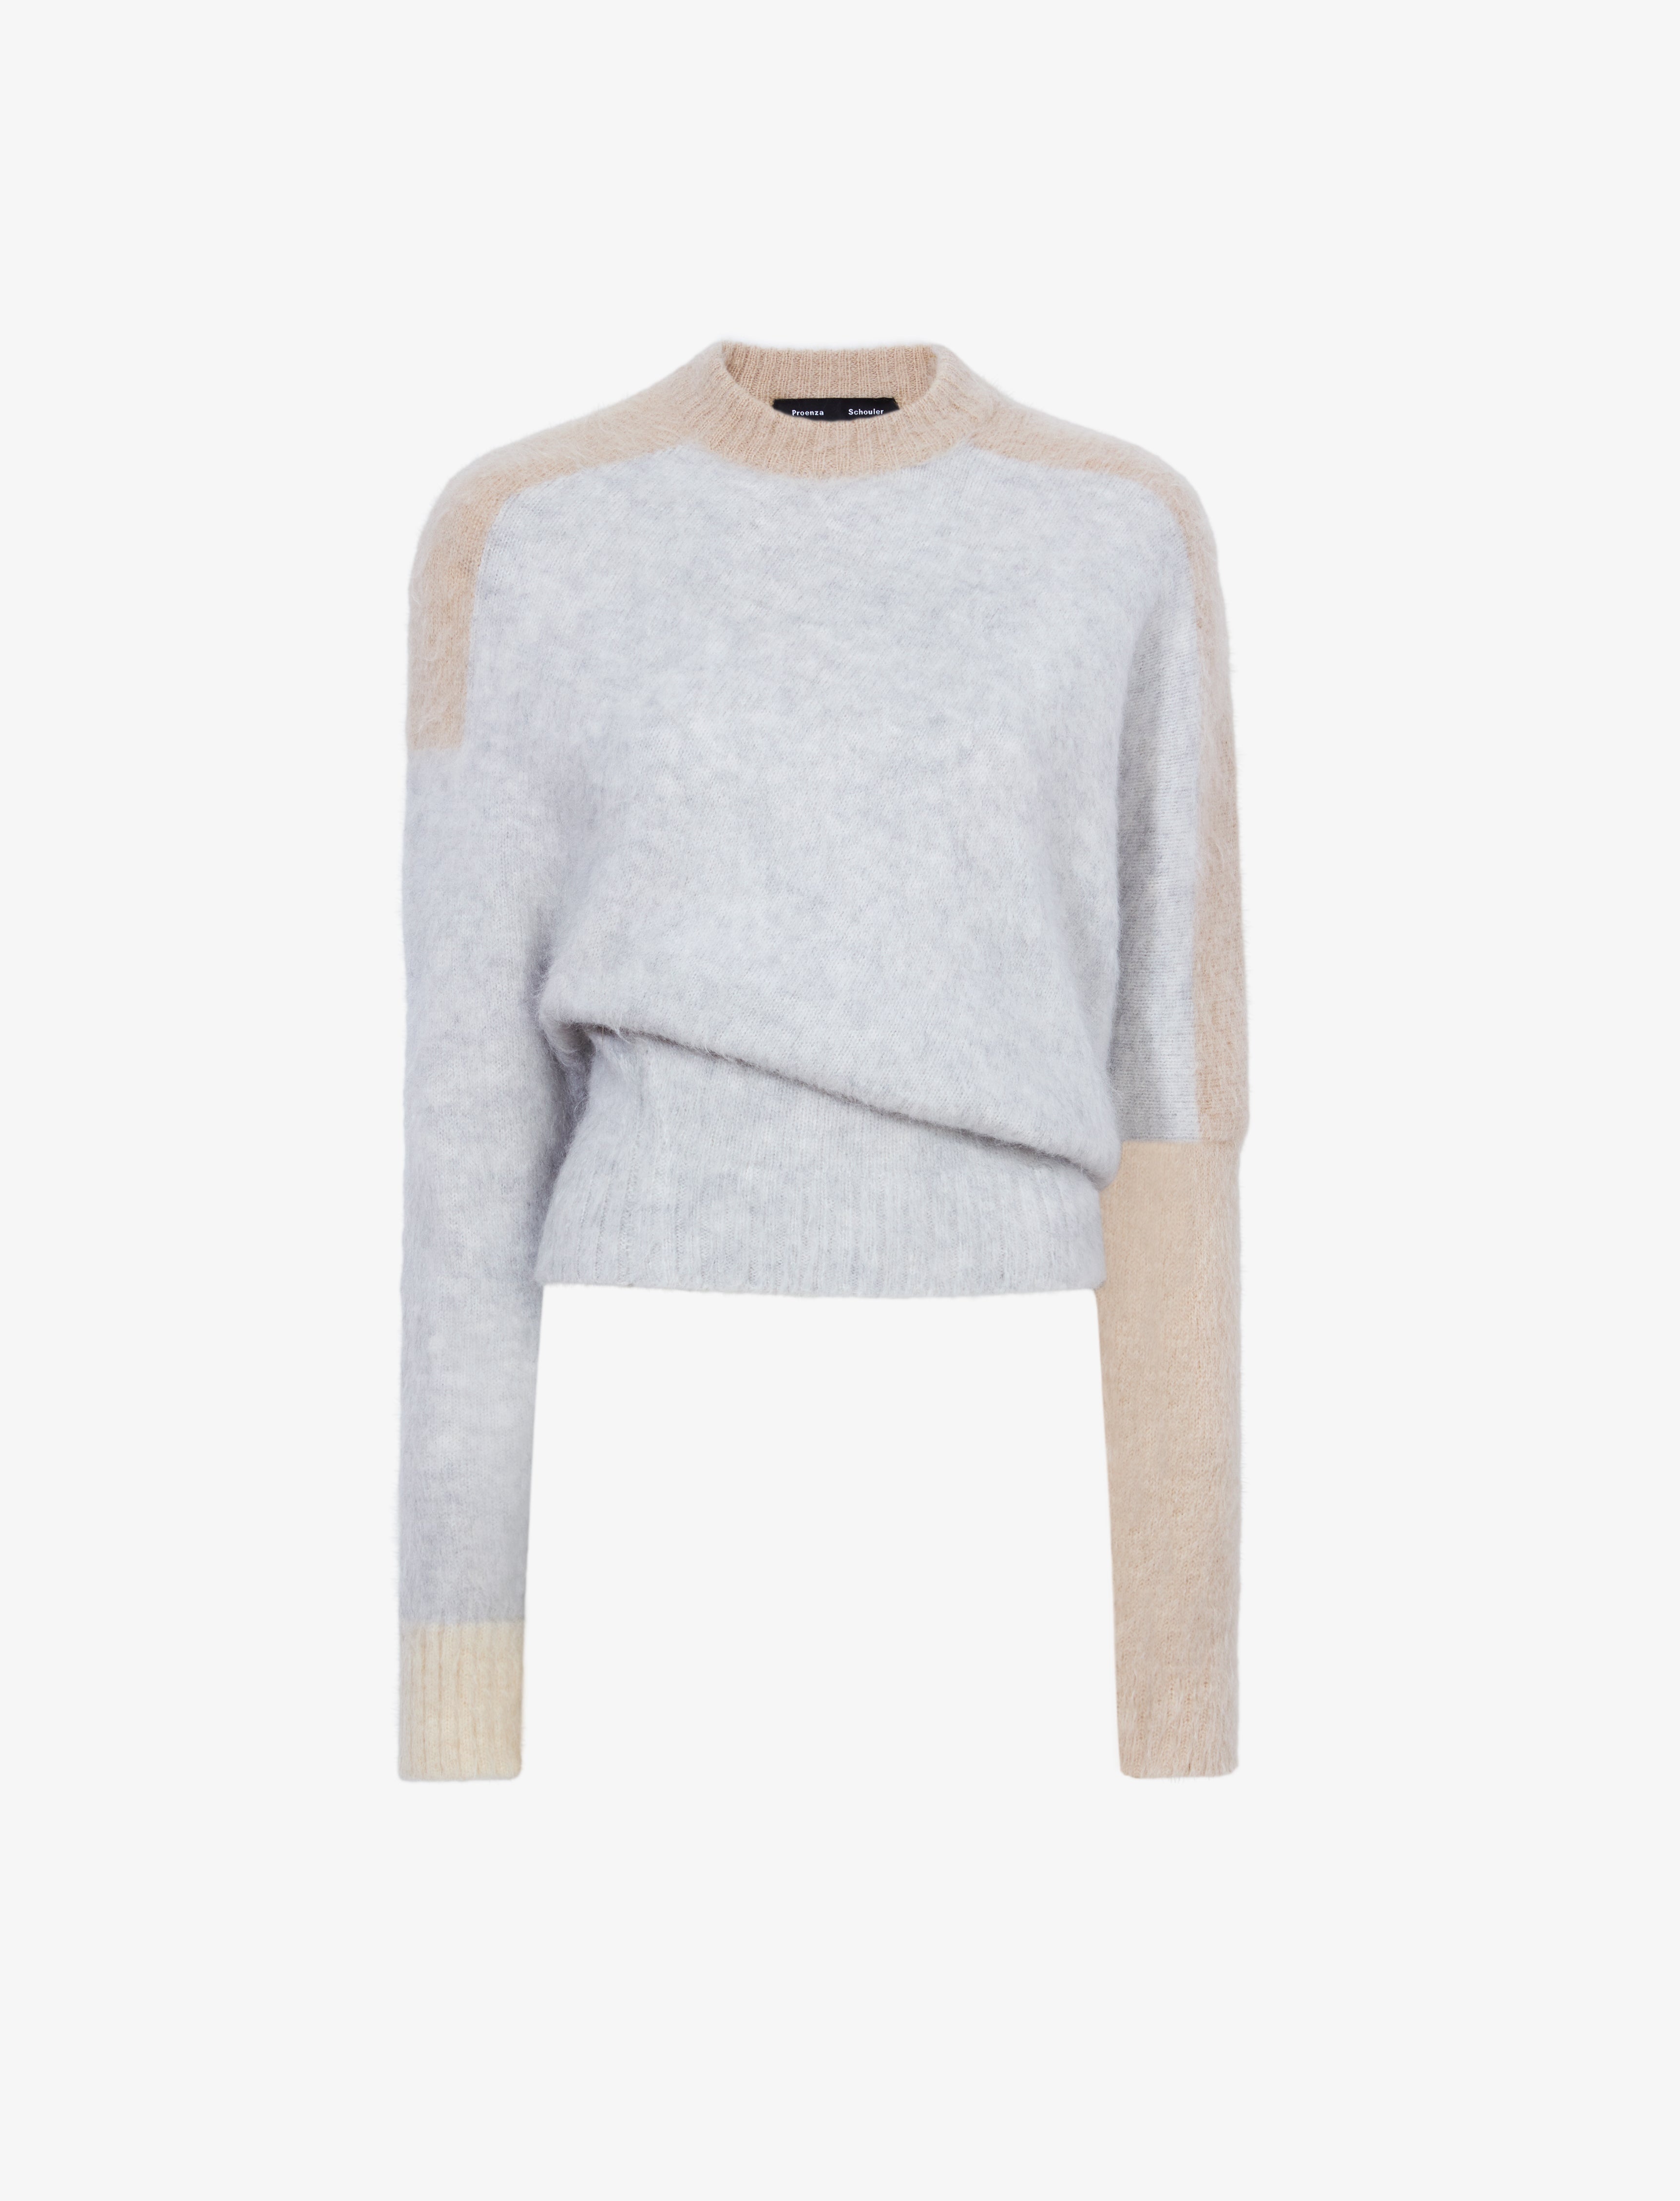 Patti Sweater in Brushed Mohair - 1